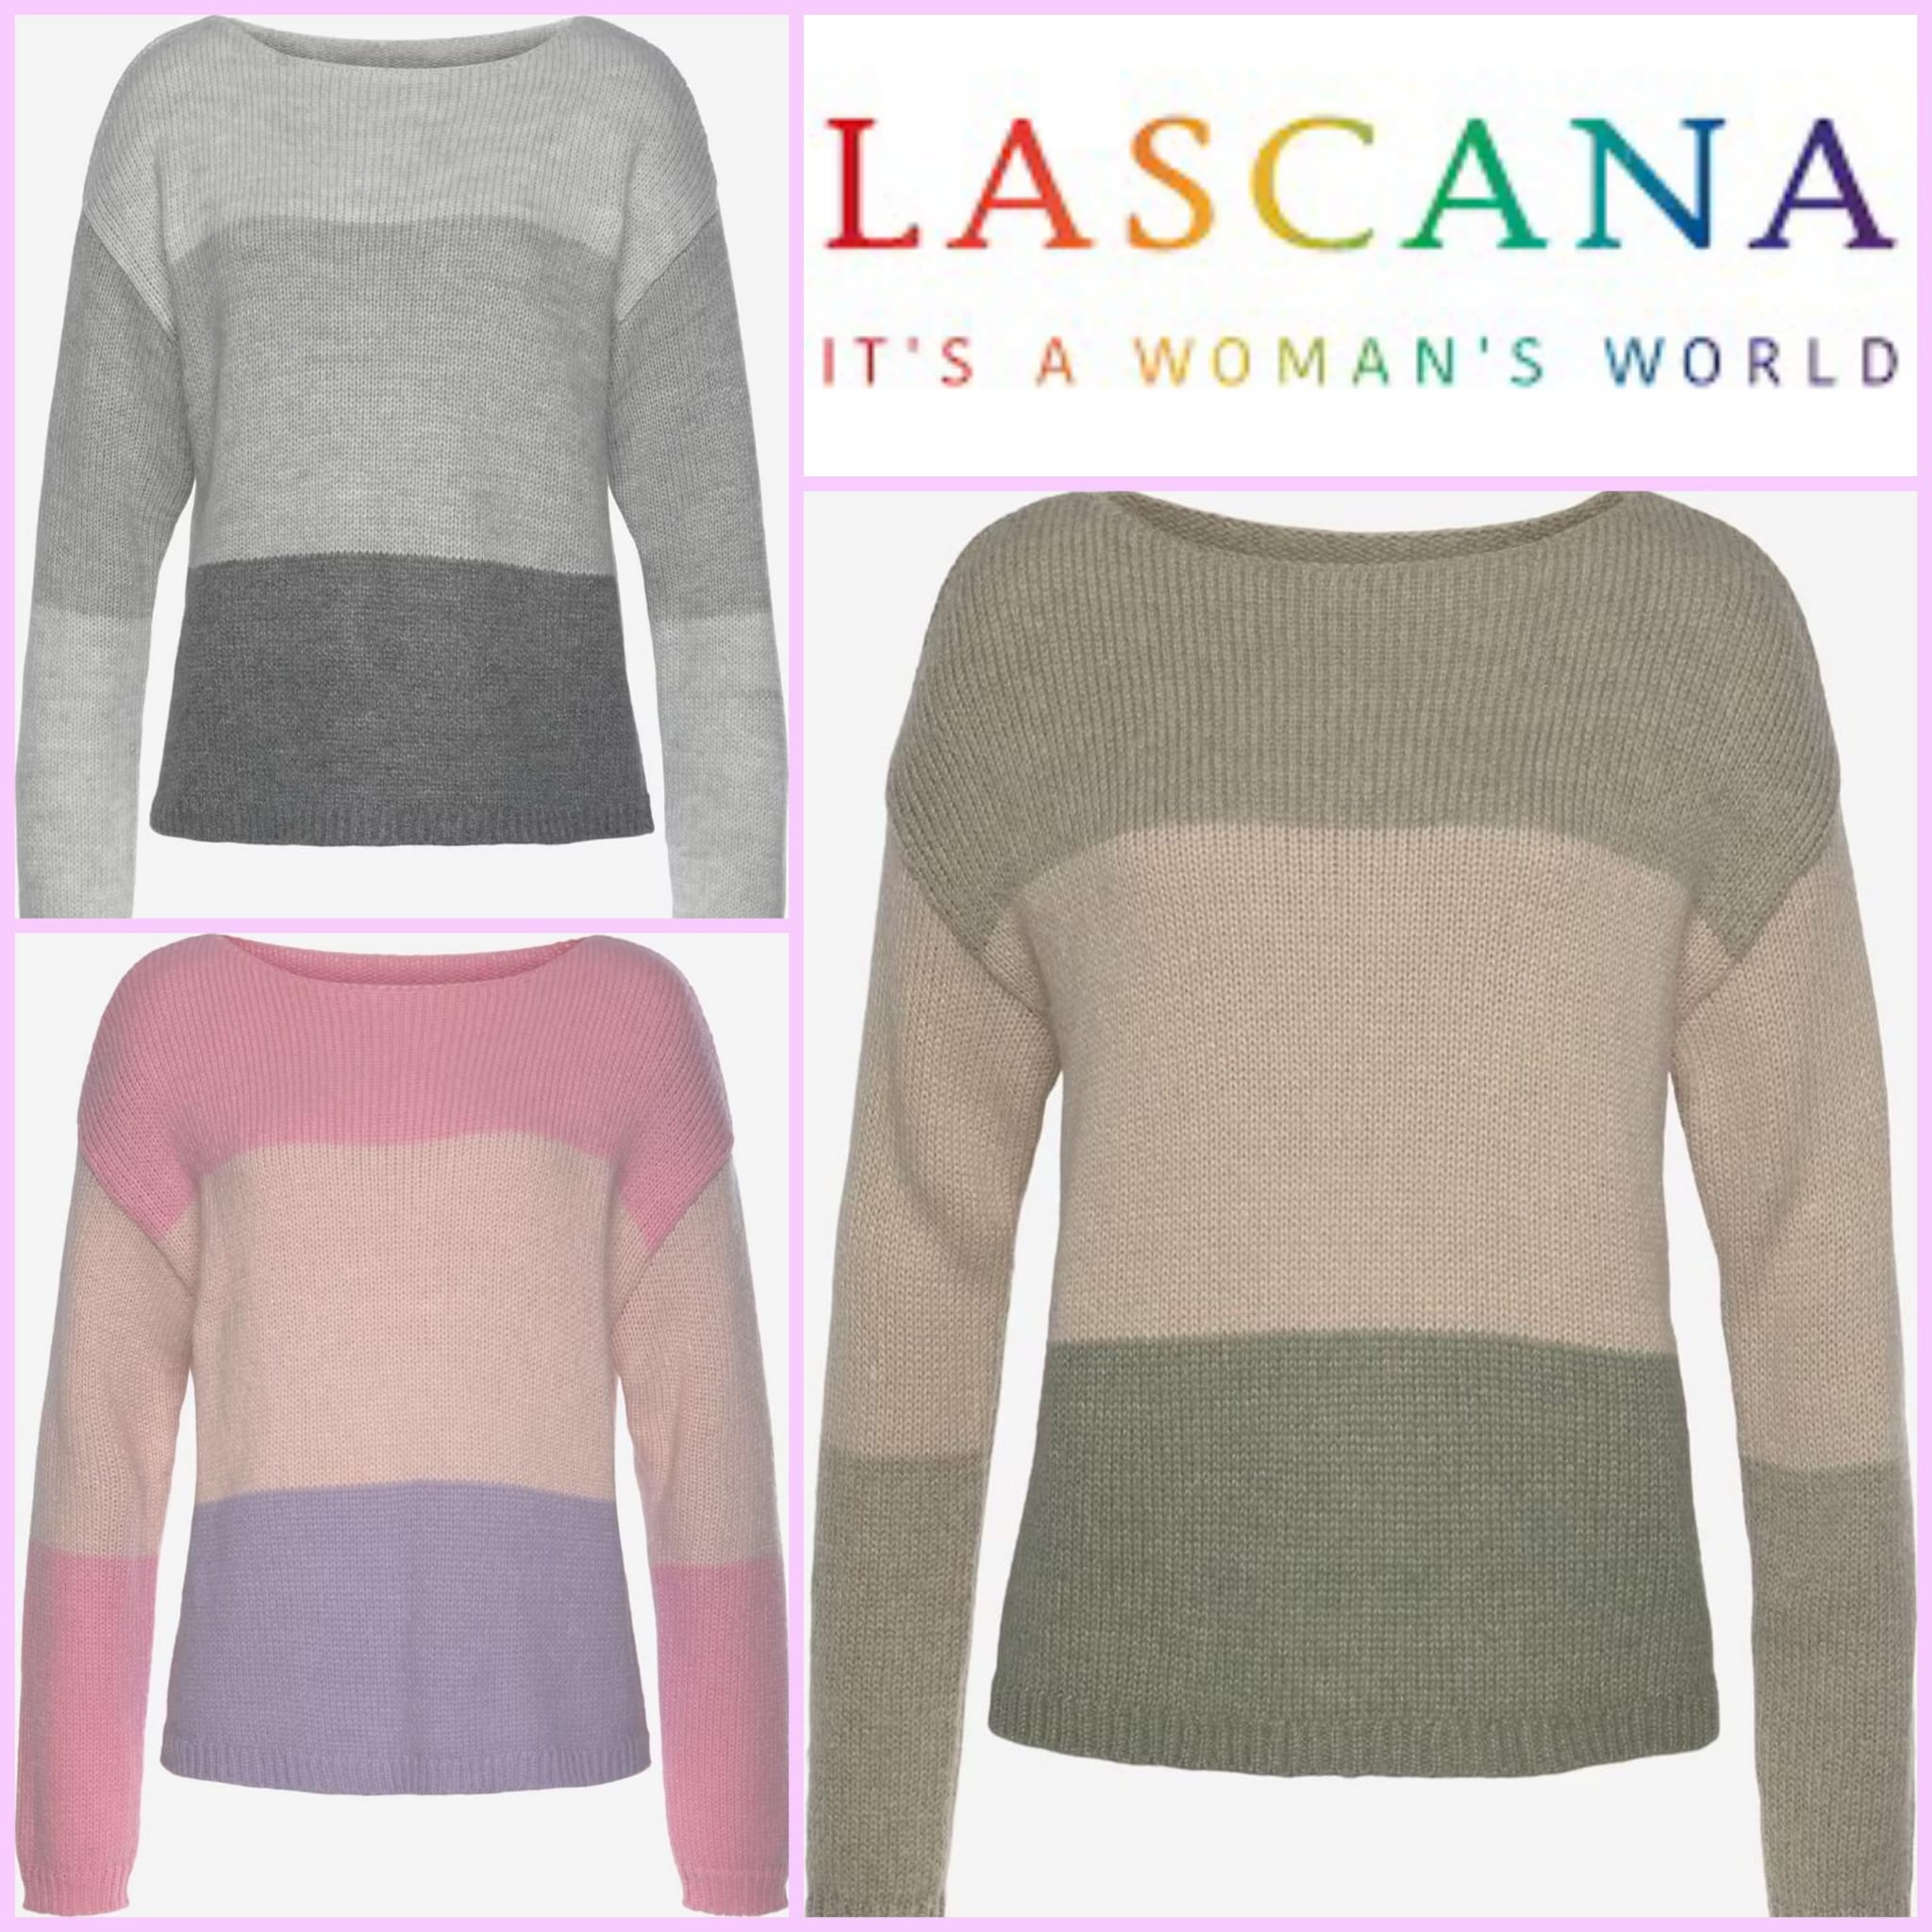 Women's pullovers from Lascana